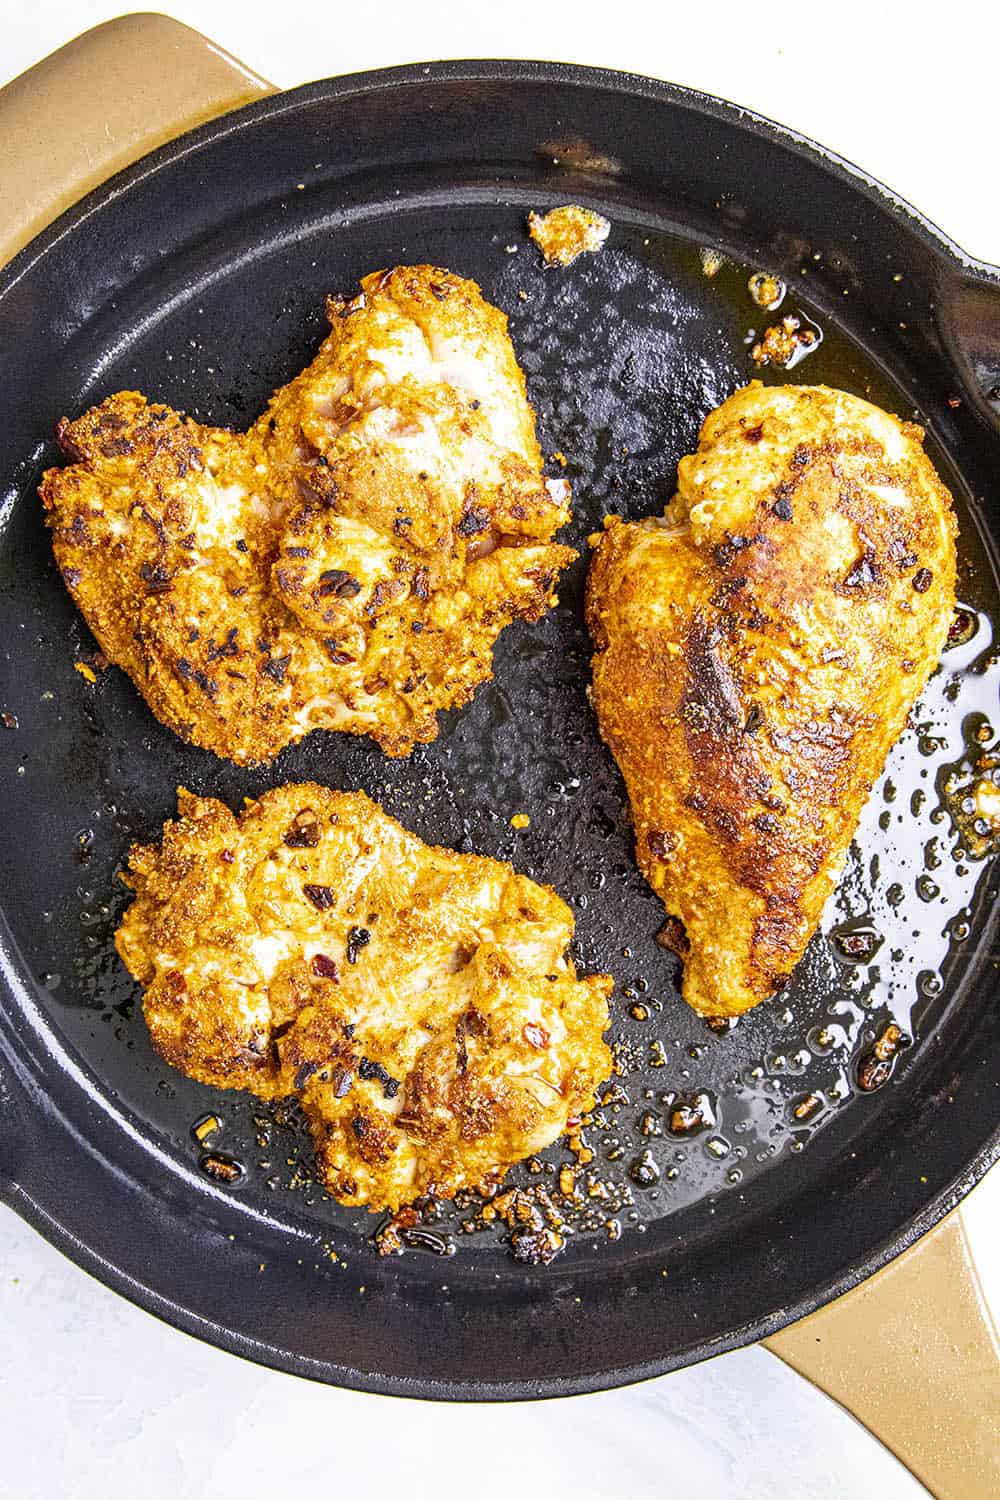 Seared chicken in a hot pan